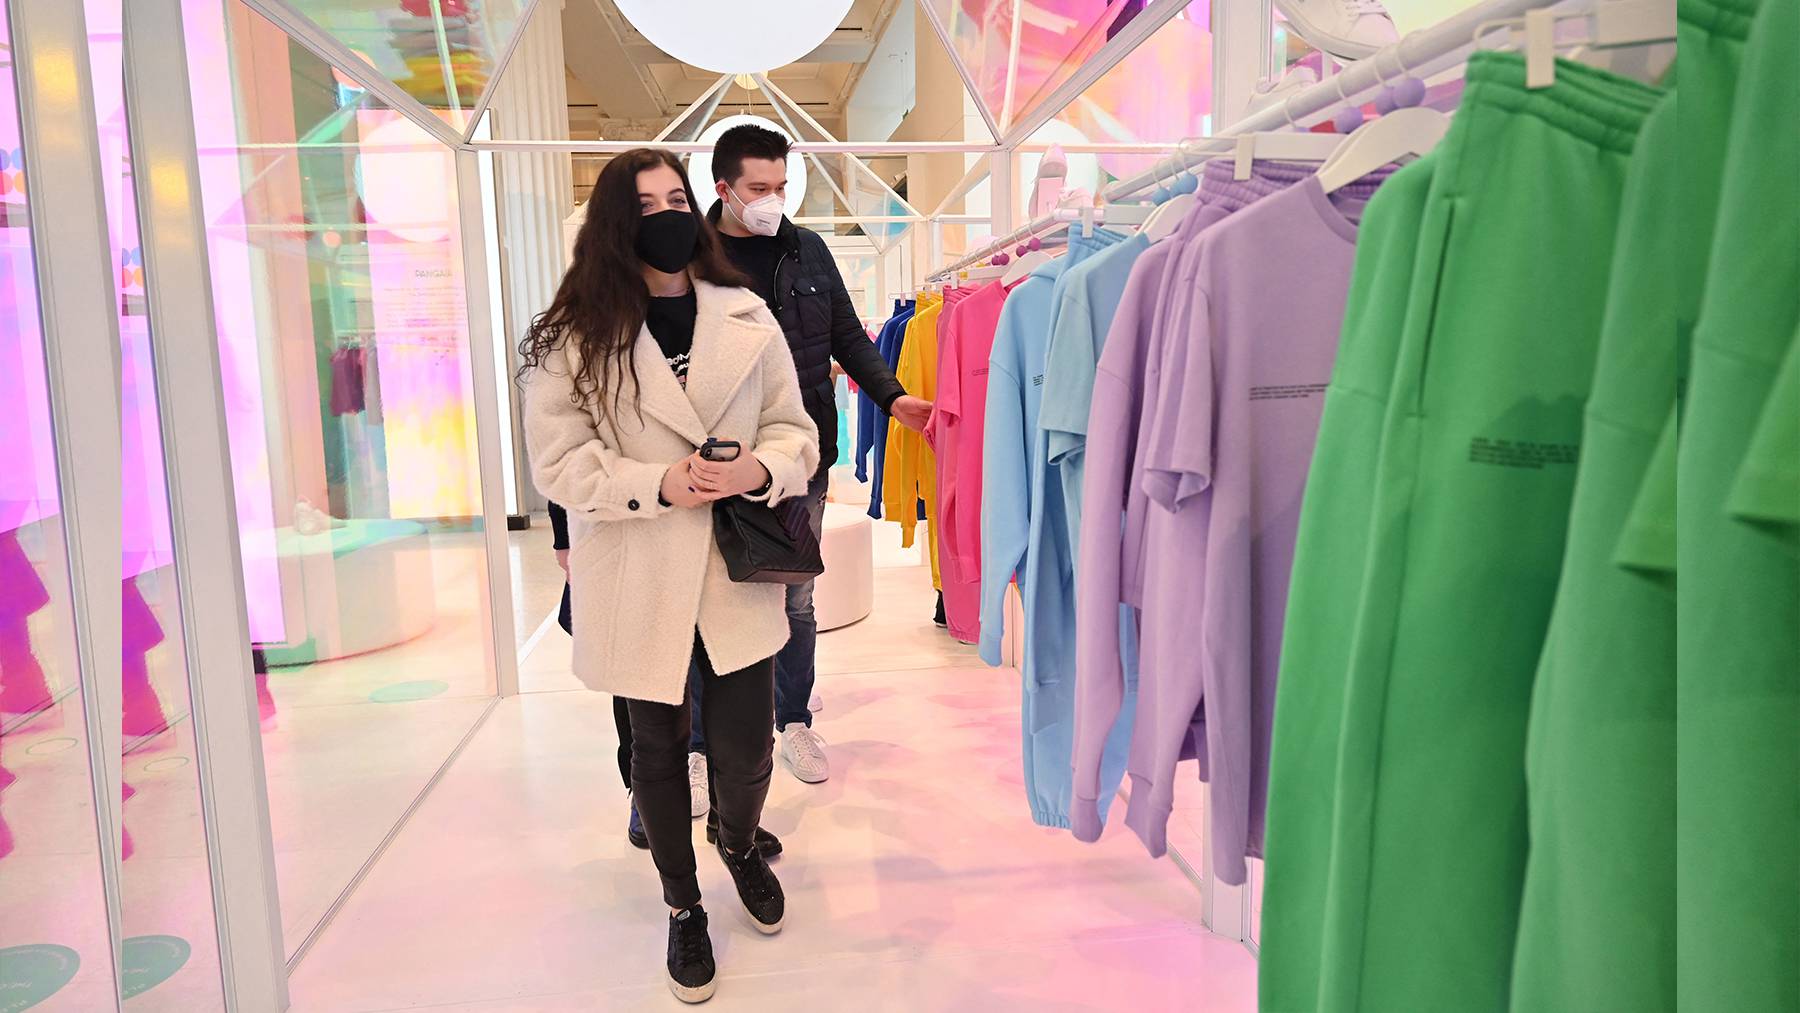 Customers browse cult brand Pangaia, which was briefly removed from British retailer Selfridges’ website as part of a broad investigation into exposure to sanctions risk.